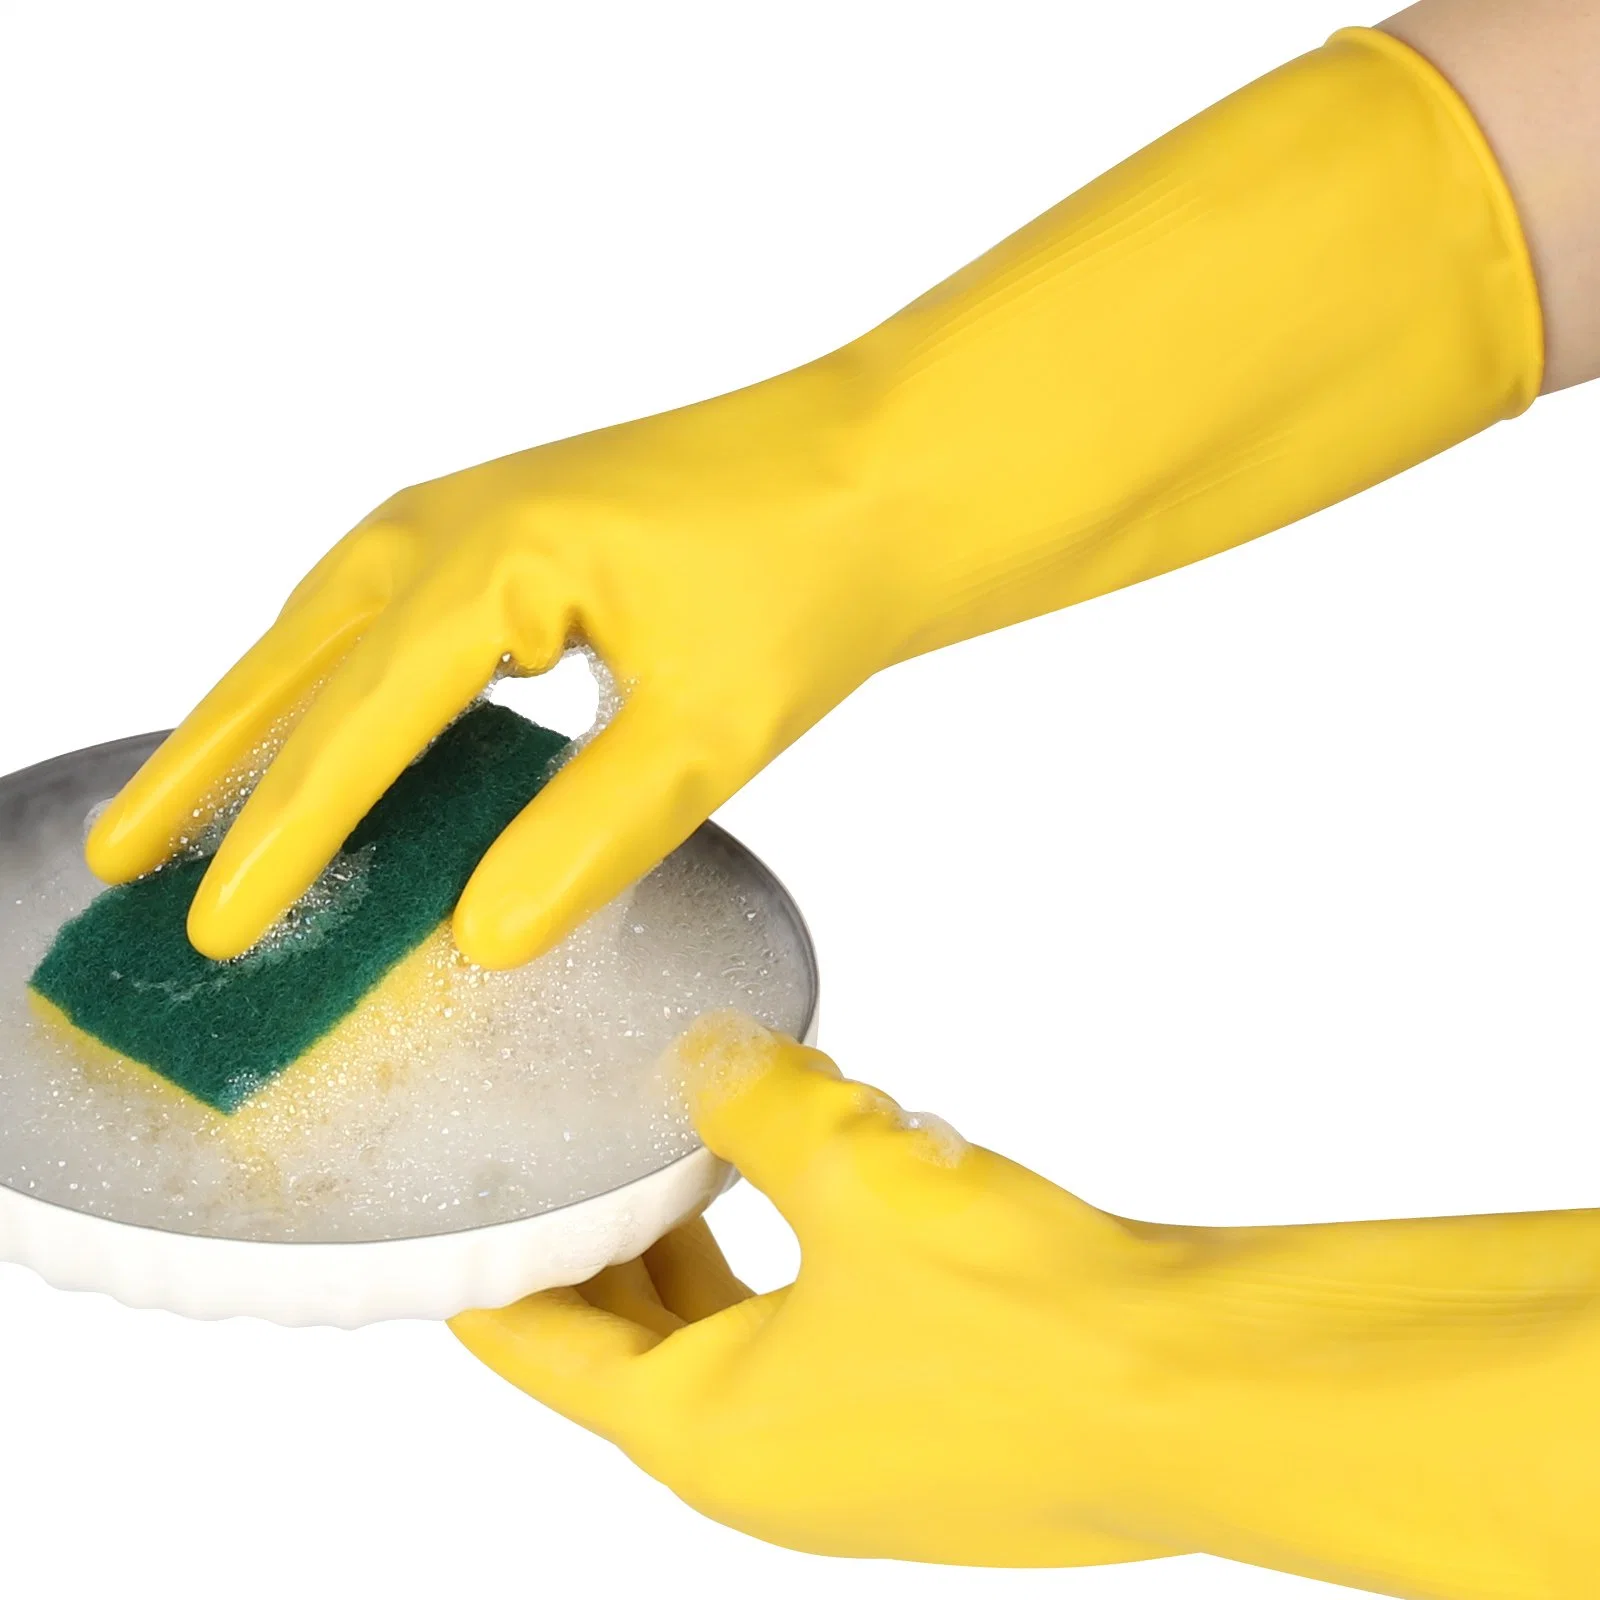 China Wholesale Yellow Latex/Rubber/Silicone Guantes Dishwashing Industrial Household Work Gloves